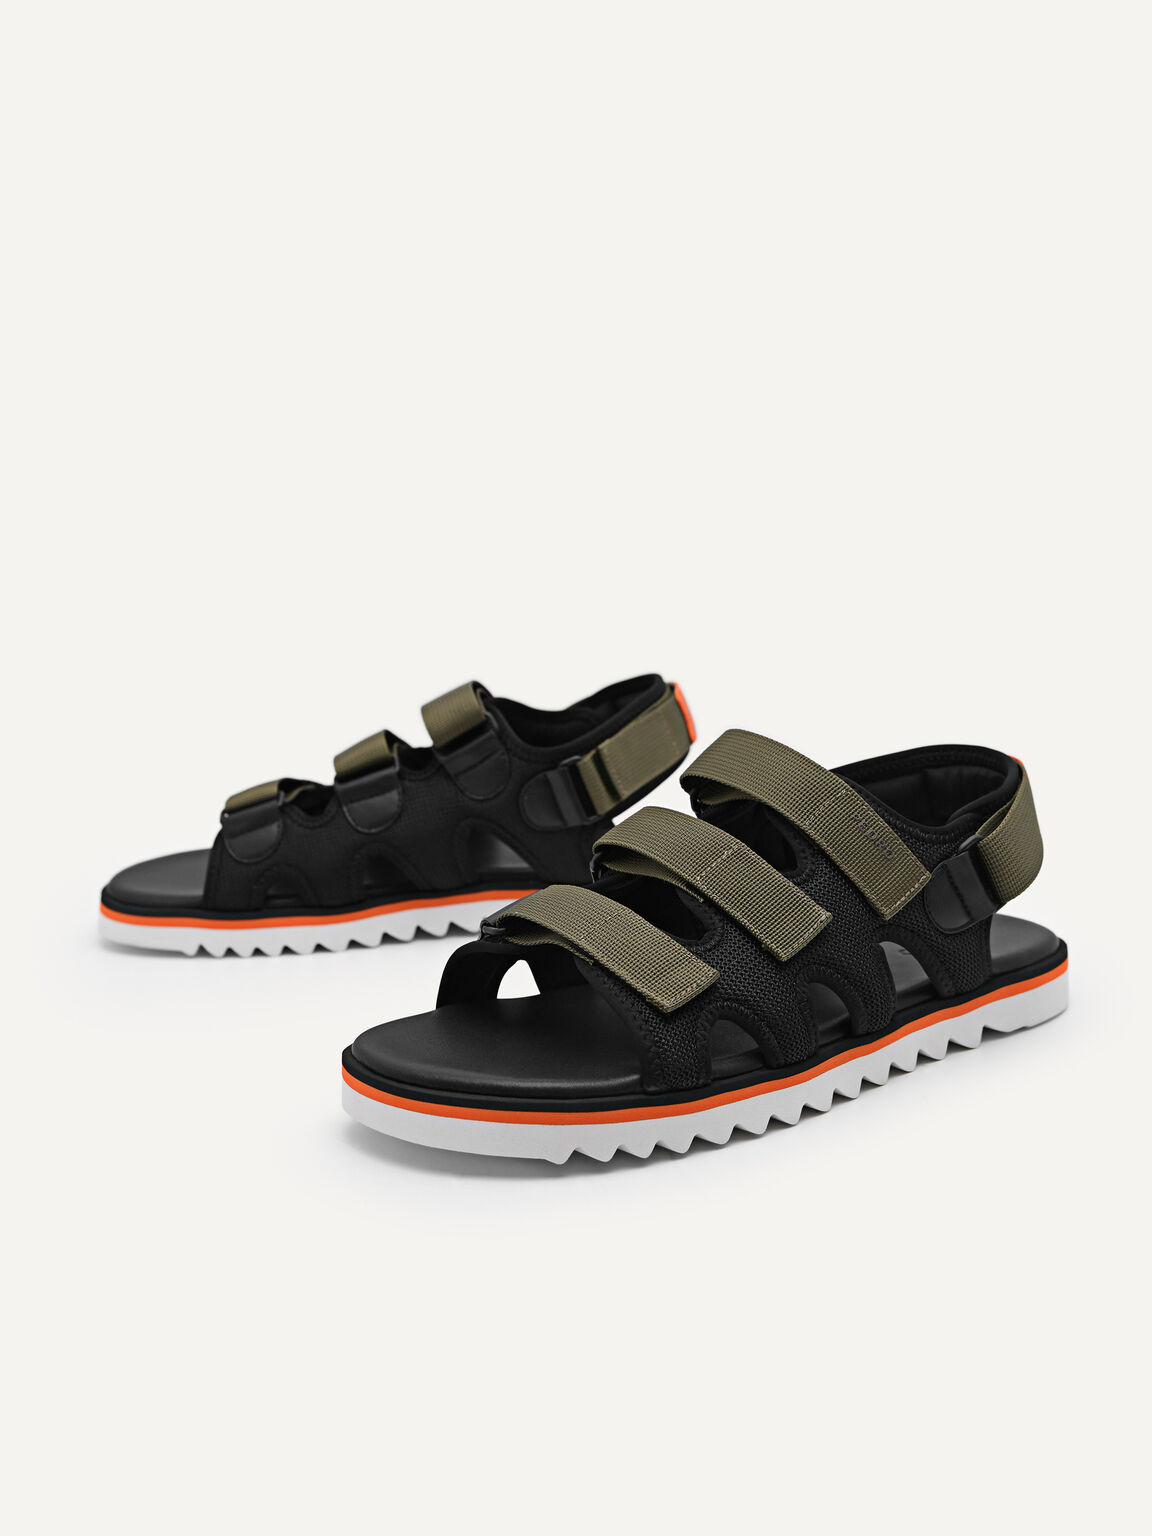 Contrasting Technical Sandals, Black